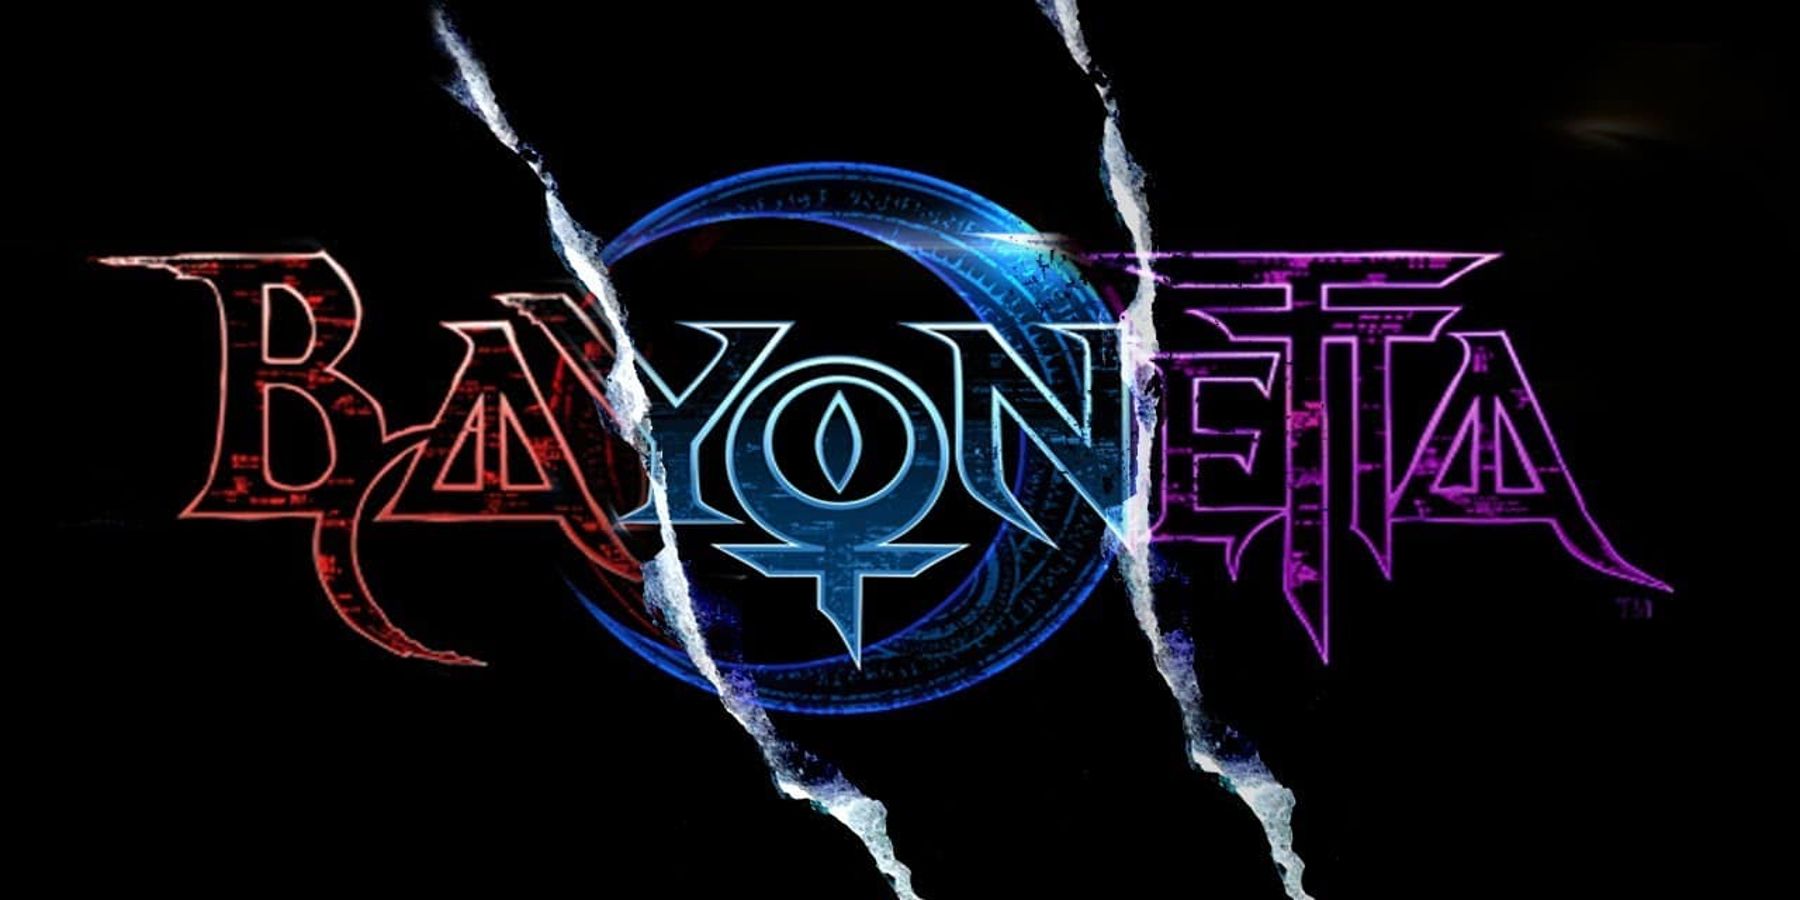 Bayonetta Logo as it appears in all 3 games, going from red, to blue, to purple.